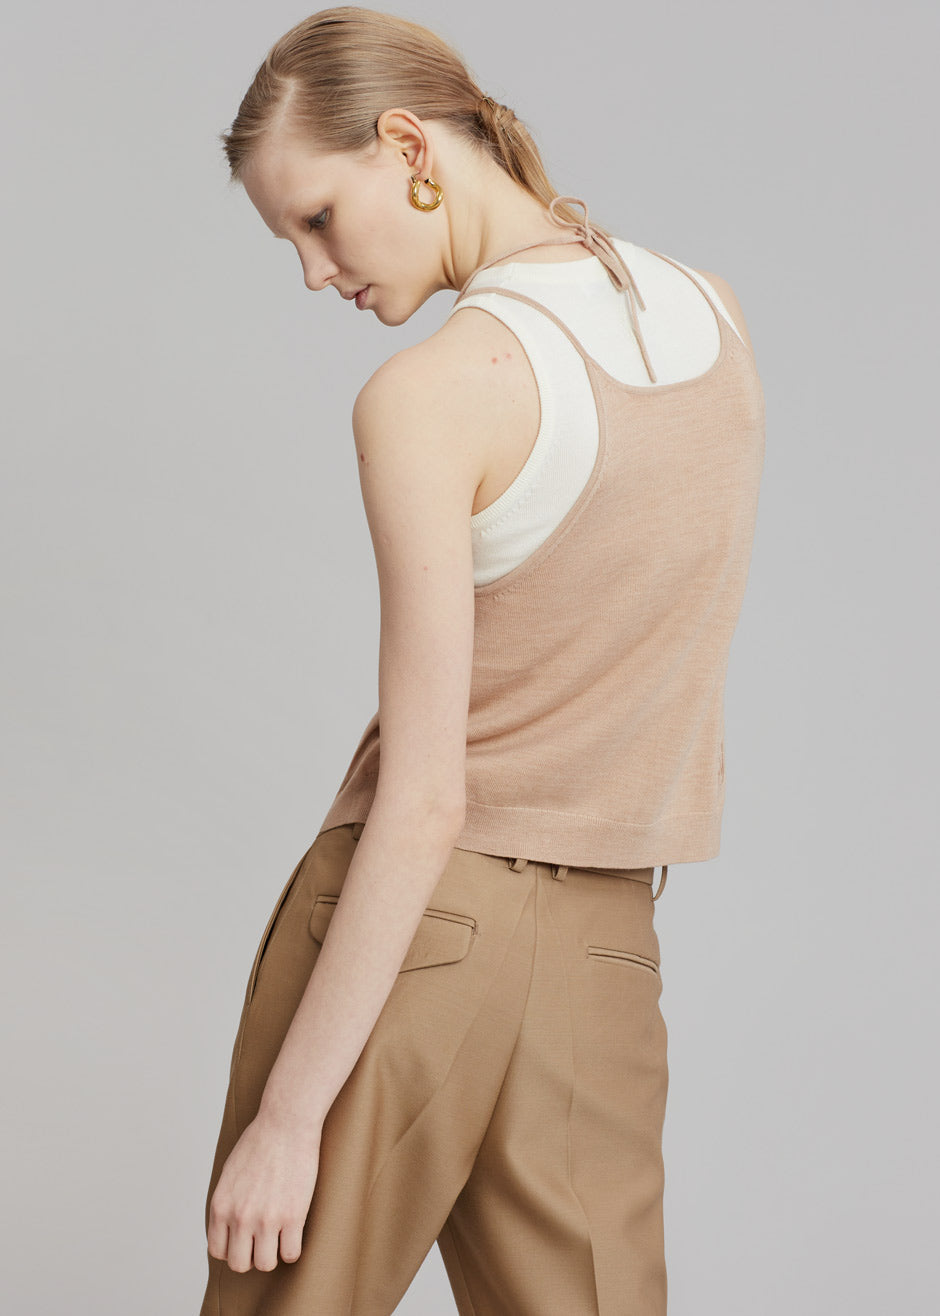 JW Anderson Layered Tank Top - White/Beige - 3